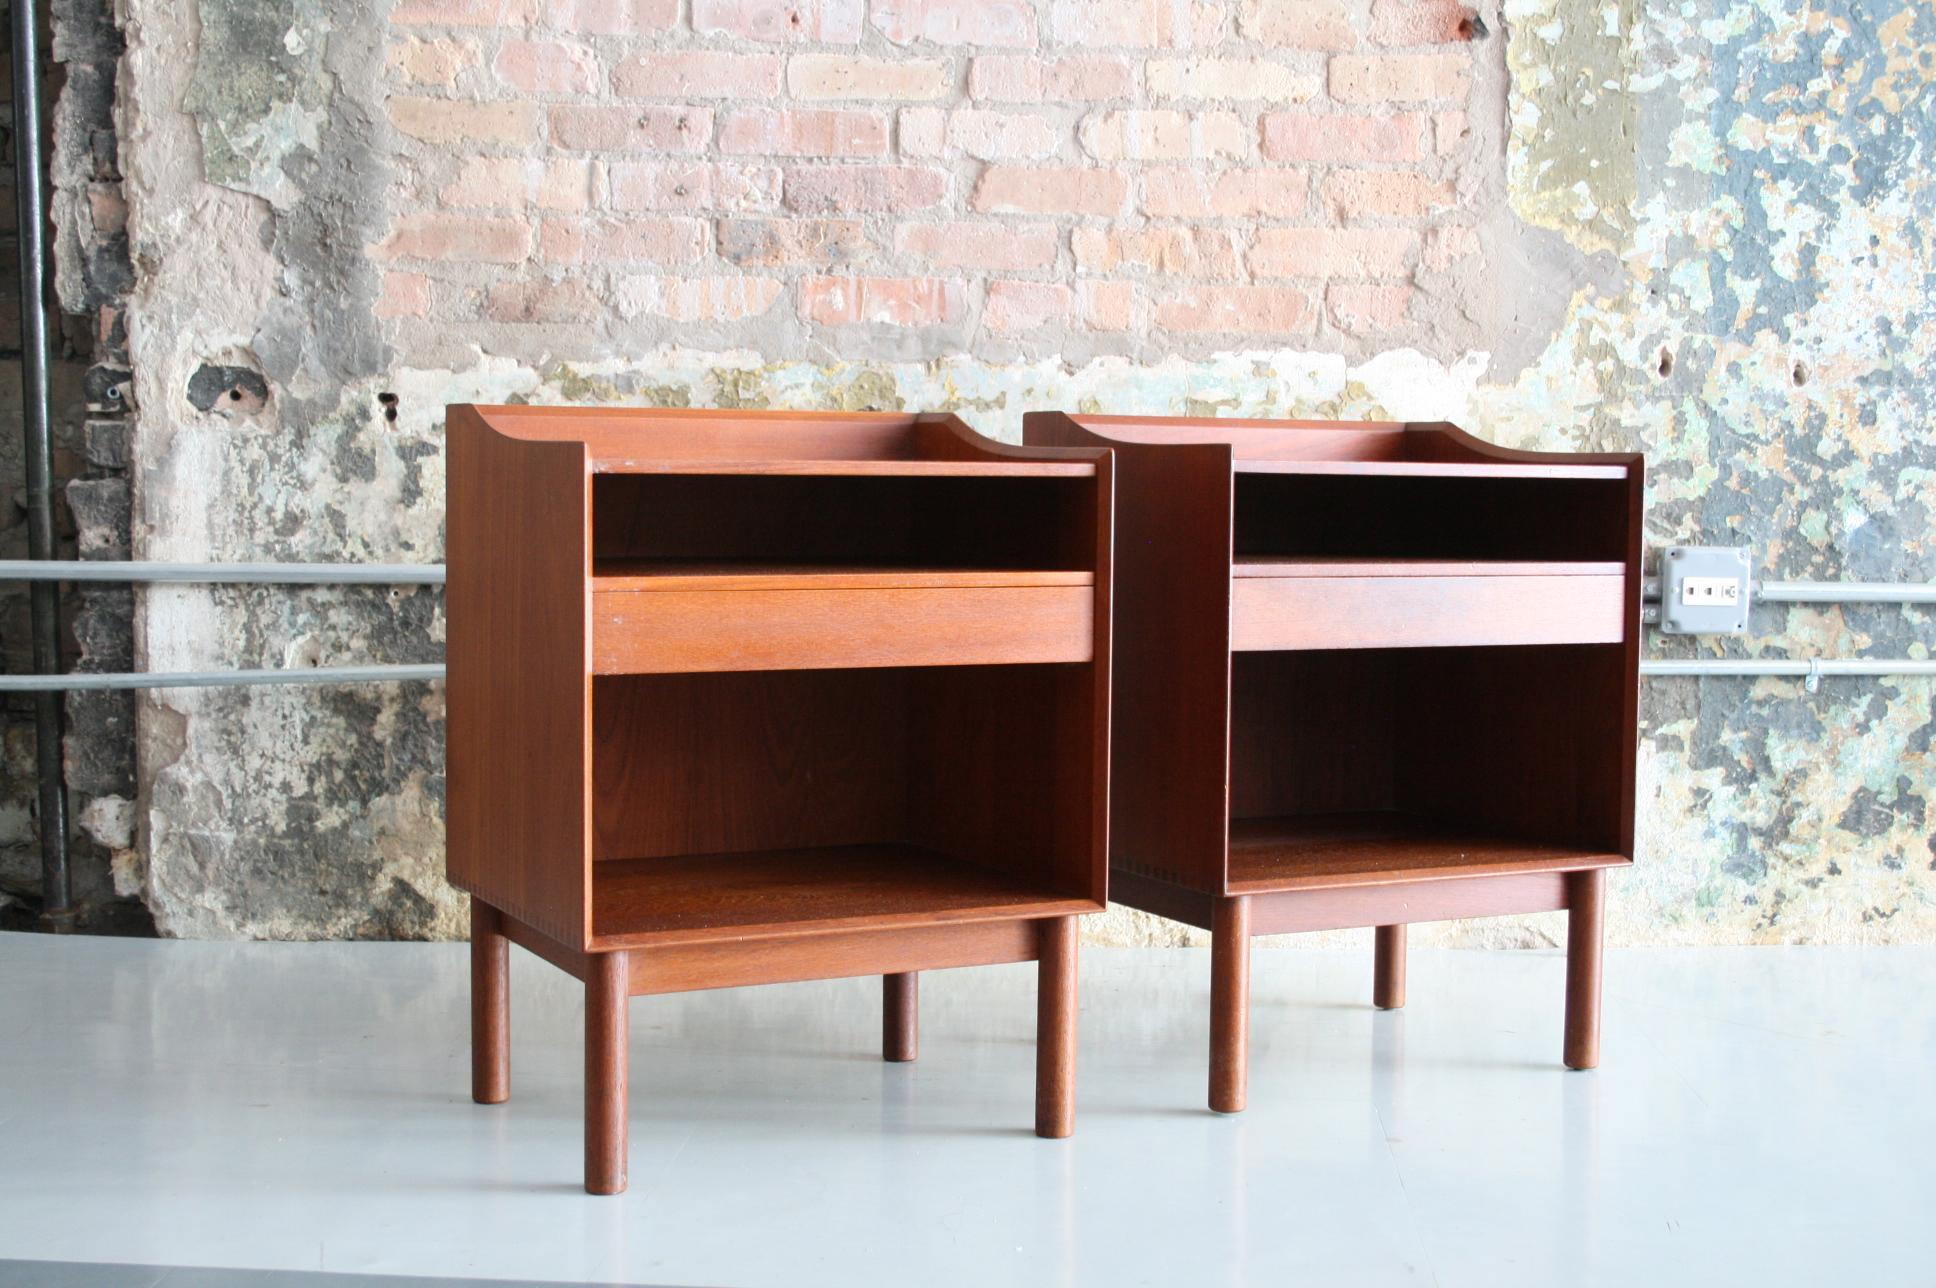 Beautiful condition!

A wonderful pair of Danish Modern nightstands or bedside tables. Solid teak construction with a partial gallery edge to top and square finger joint to lower corners of each case. Each features a shallow shelf, a drawer and an